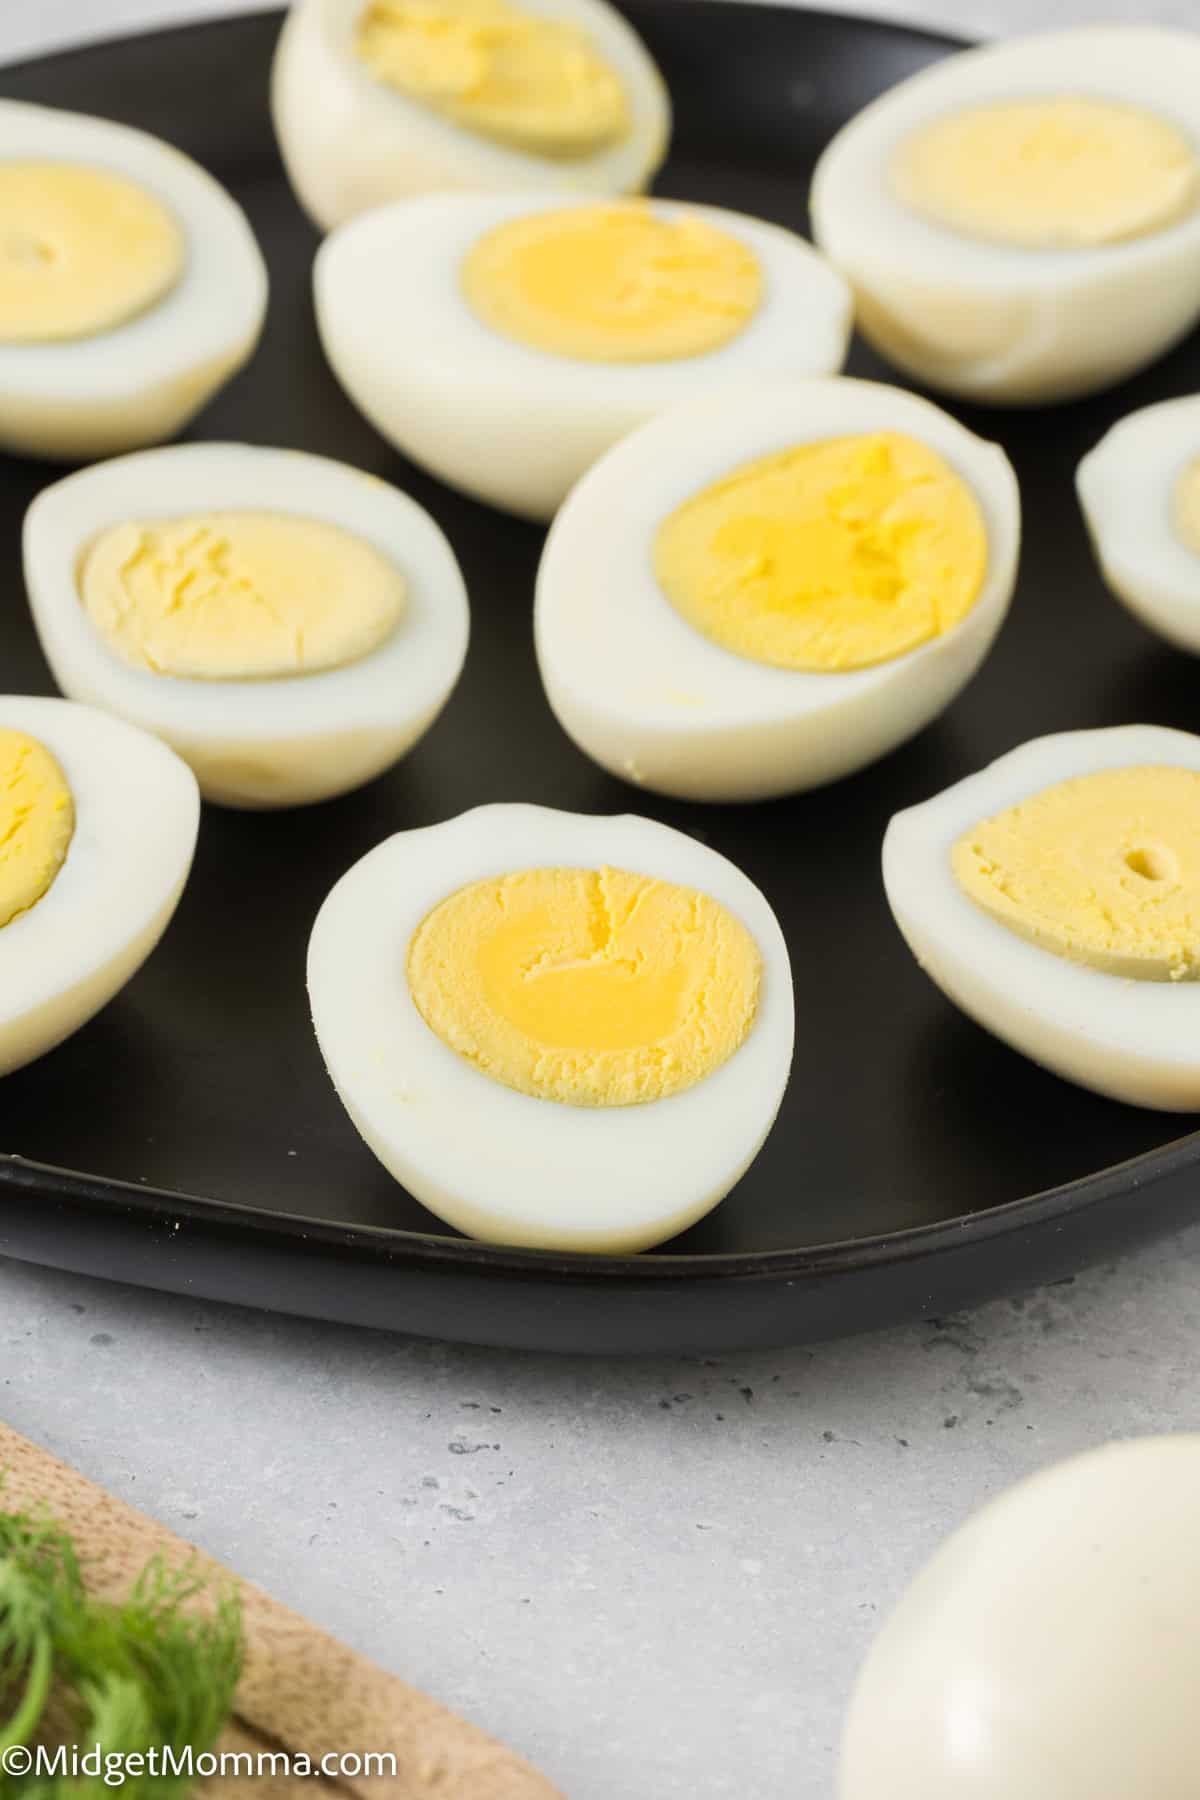 Halved hard-boiled eggs with bright yellow yolks displayed on a black skillet, with a partial view of eggs on a white plate in the foreground.